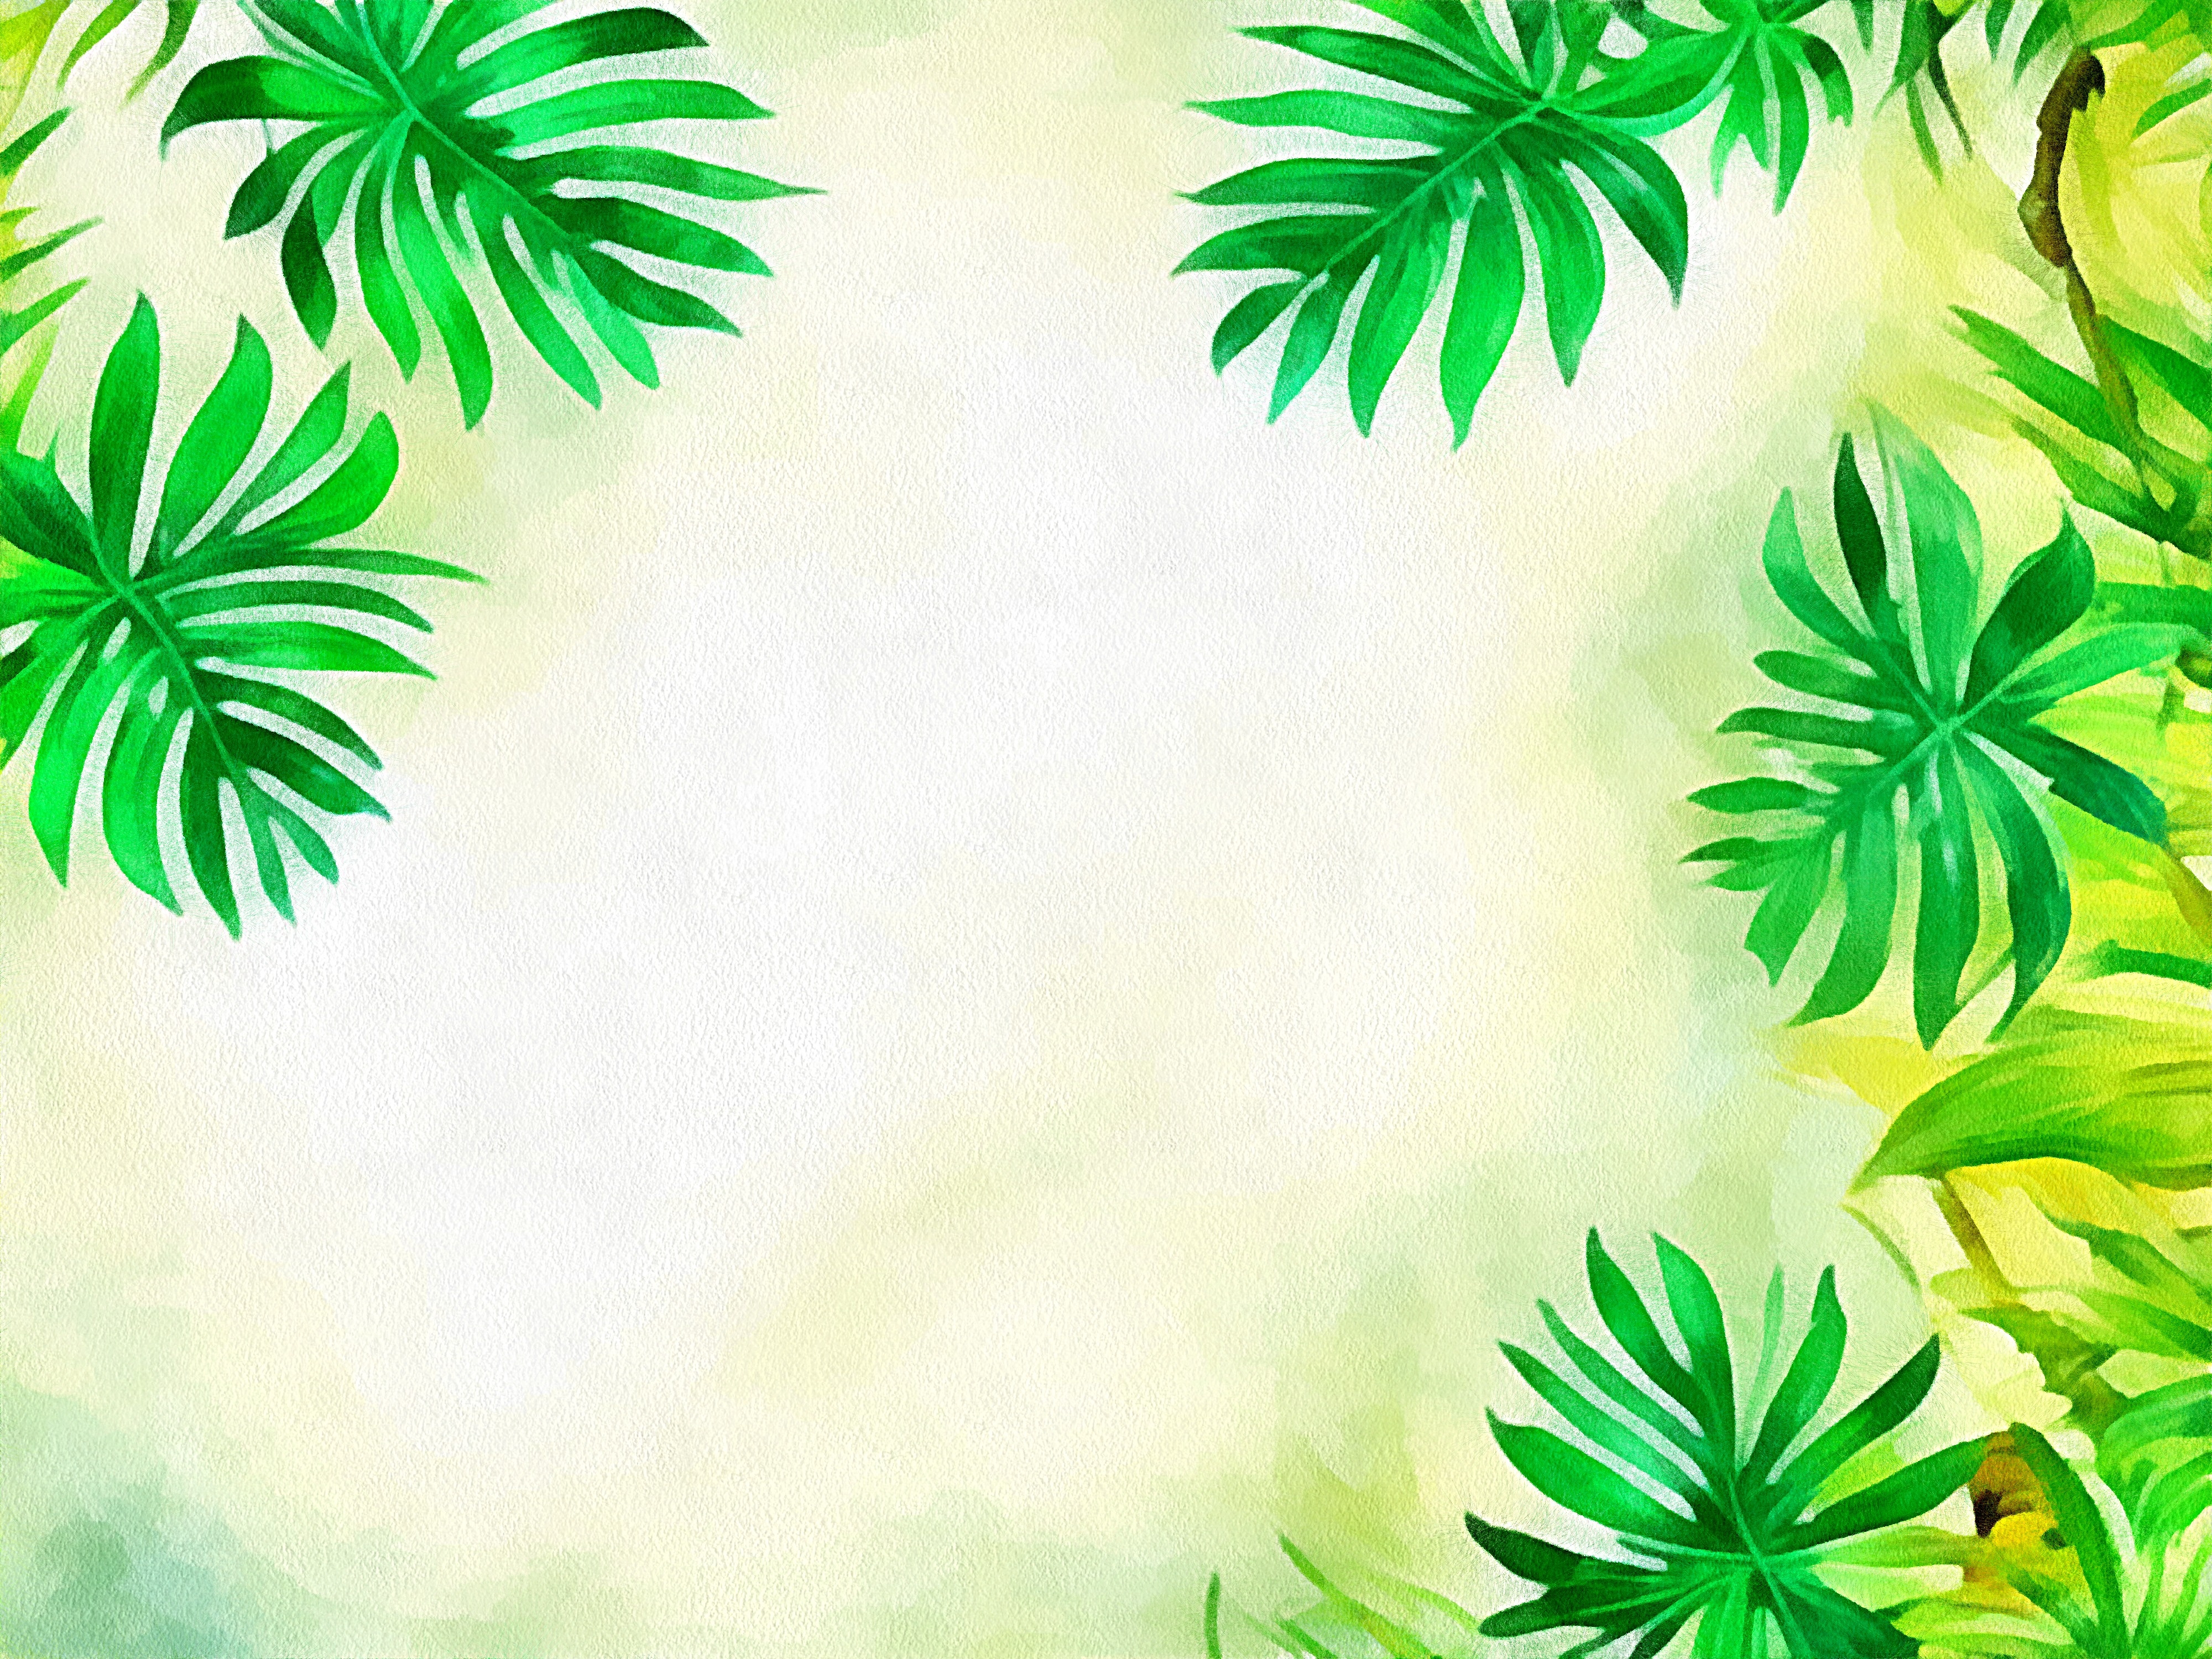 Nature Floral Background